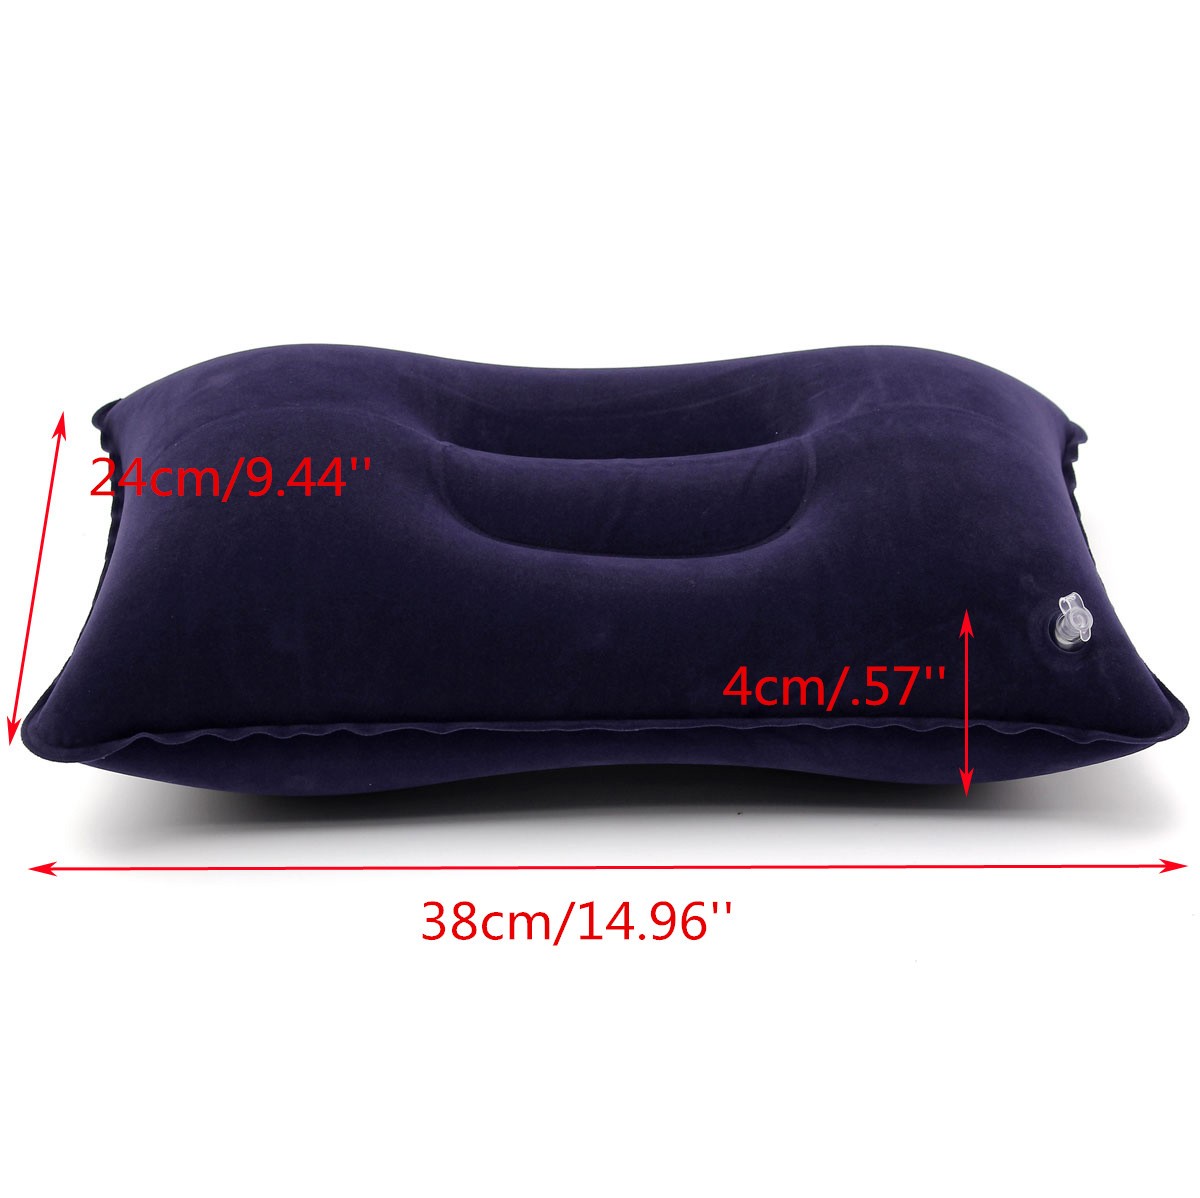 Blue-Air-Travel-Camping-Inflatable-Pillow-Protect-Bed-Comfortable-Rest-Head-Neck-Cushion-1014051